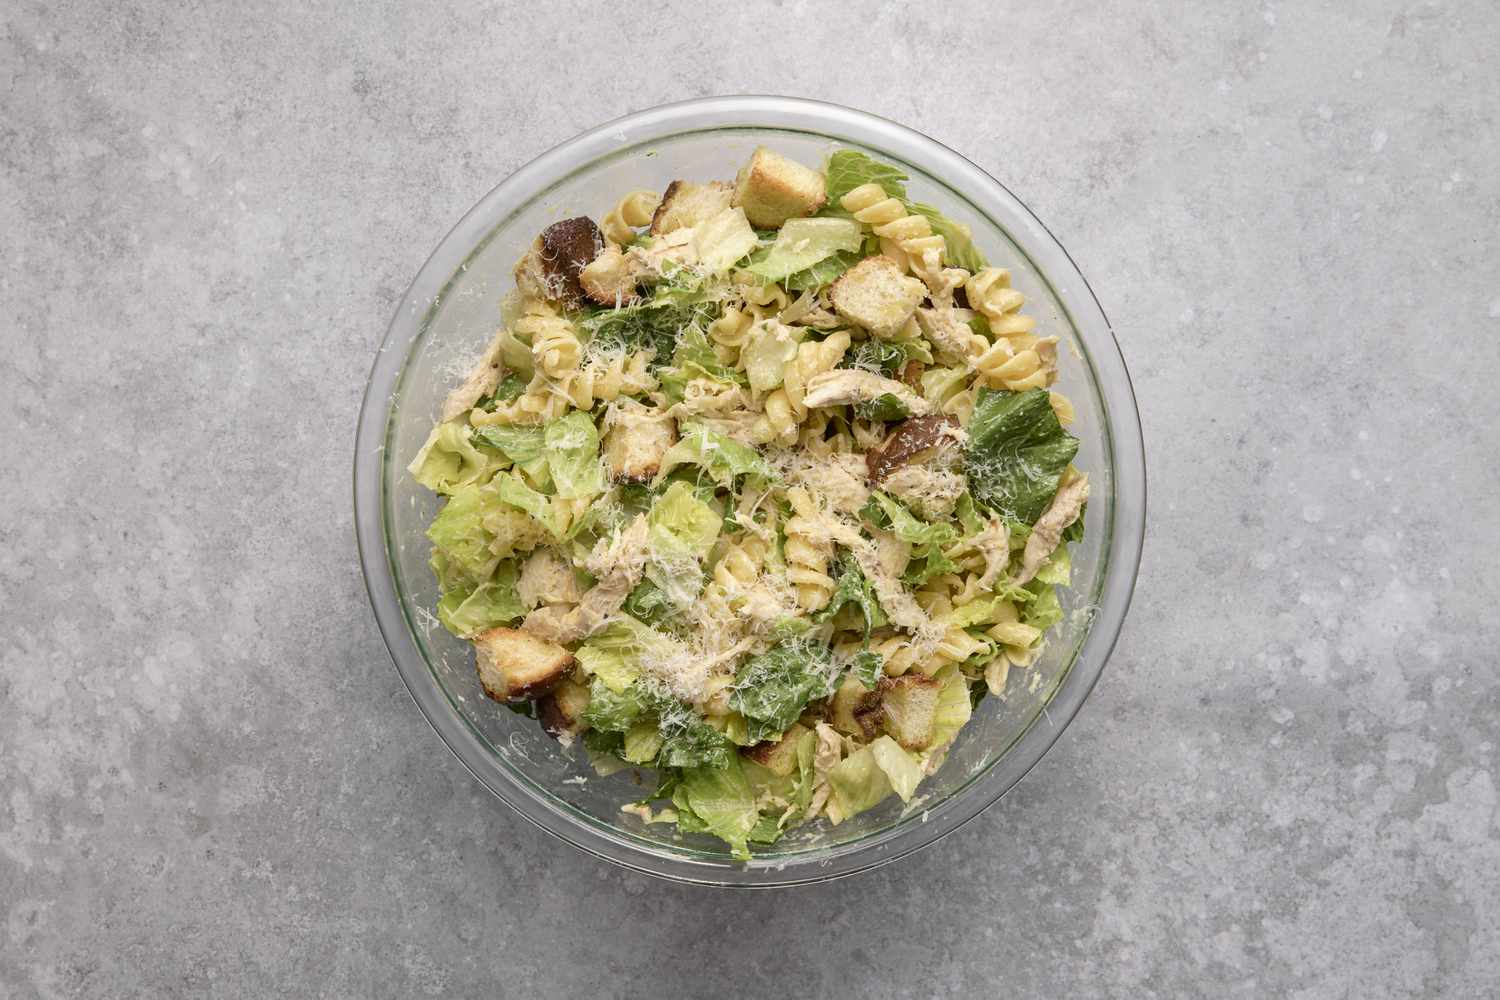 A bowl of chicken caesar pasta salad with rotissere chicken, fusilli pasta, romaine lettuce, and topped with Parmigiano-Reggiano